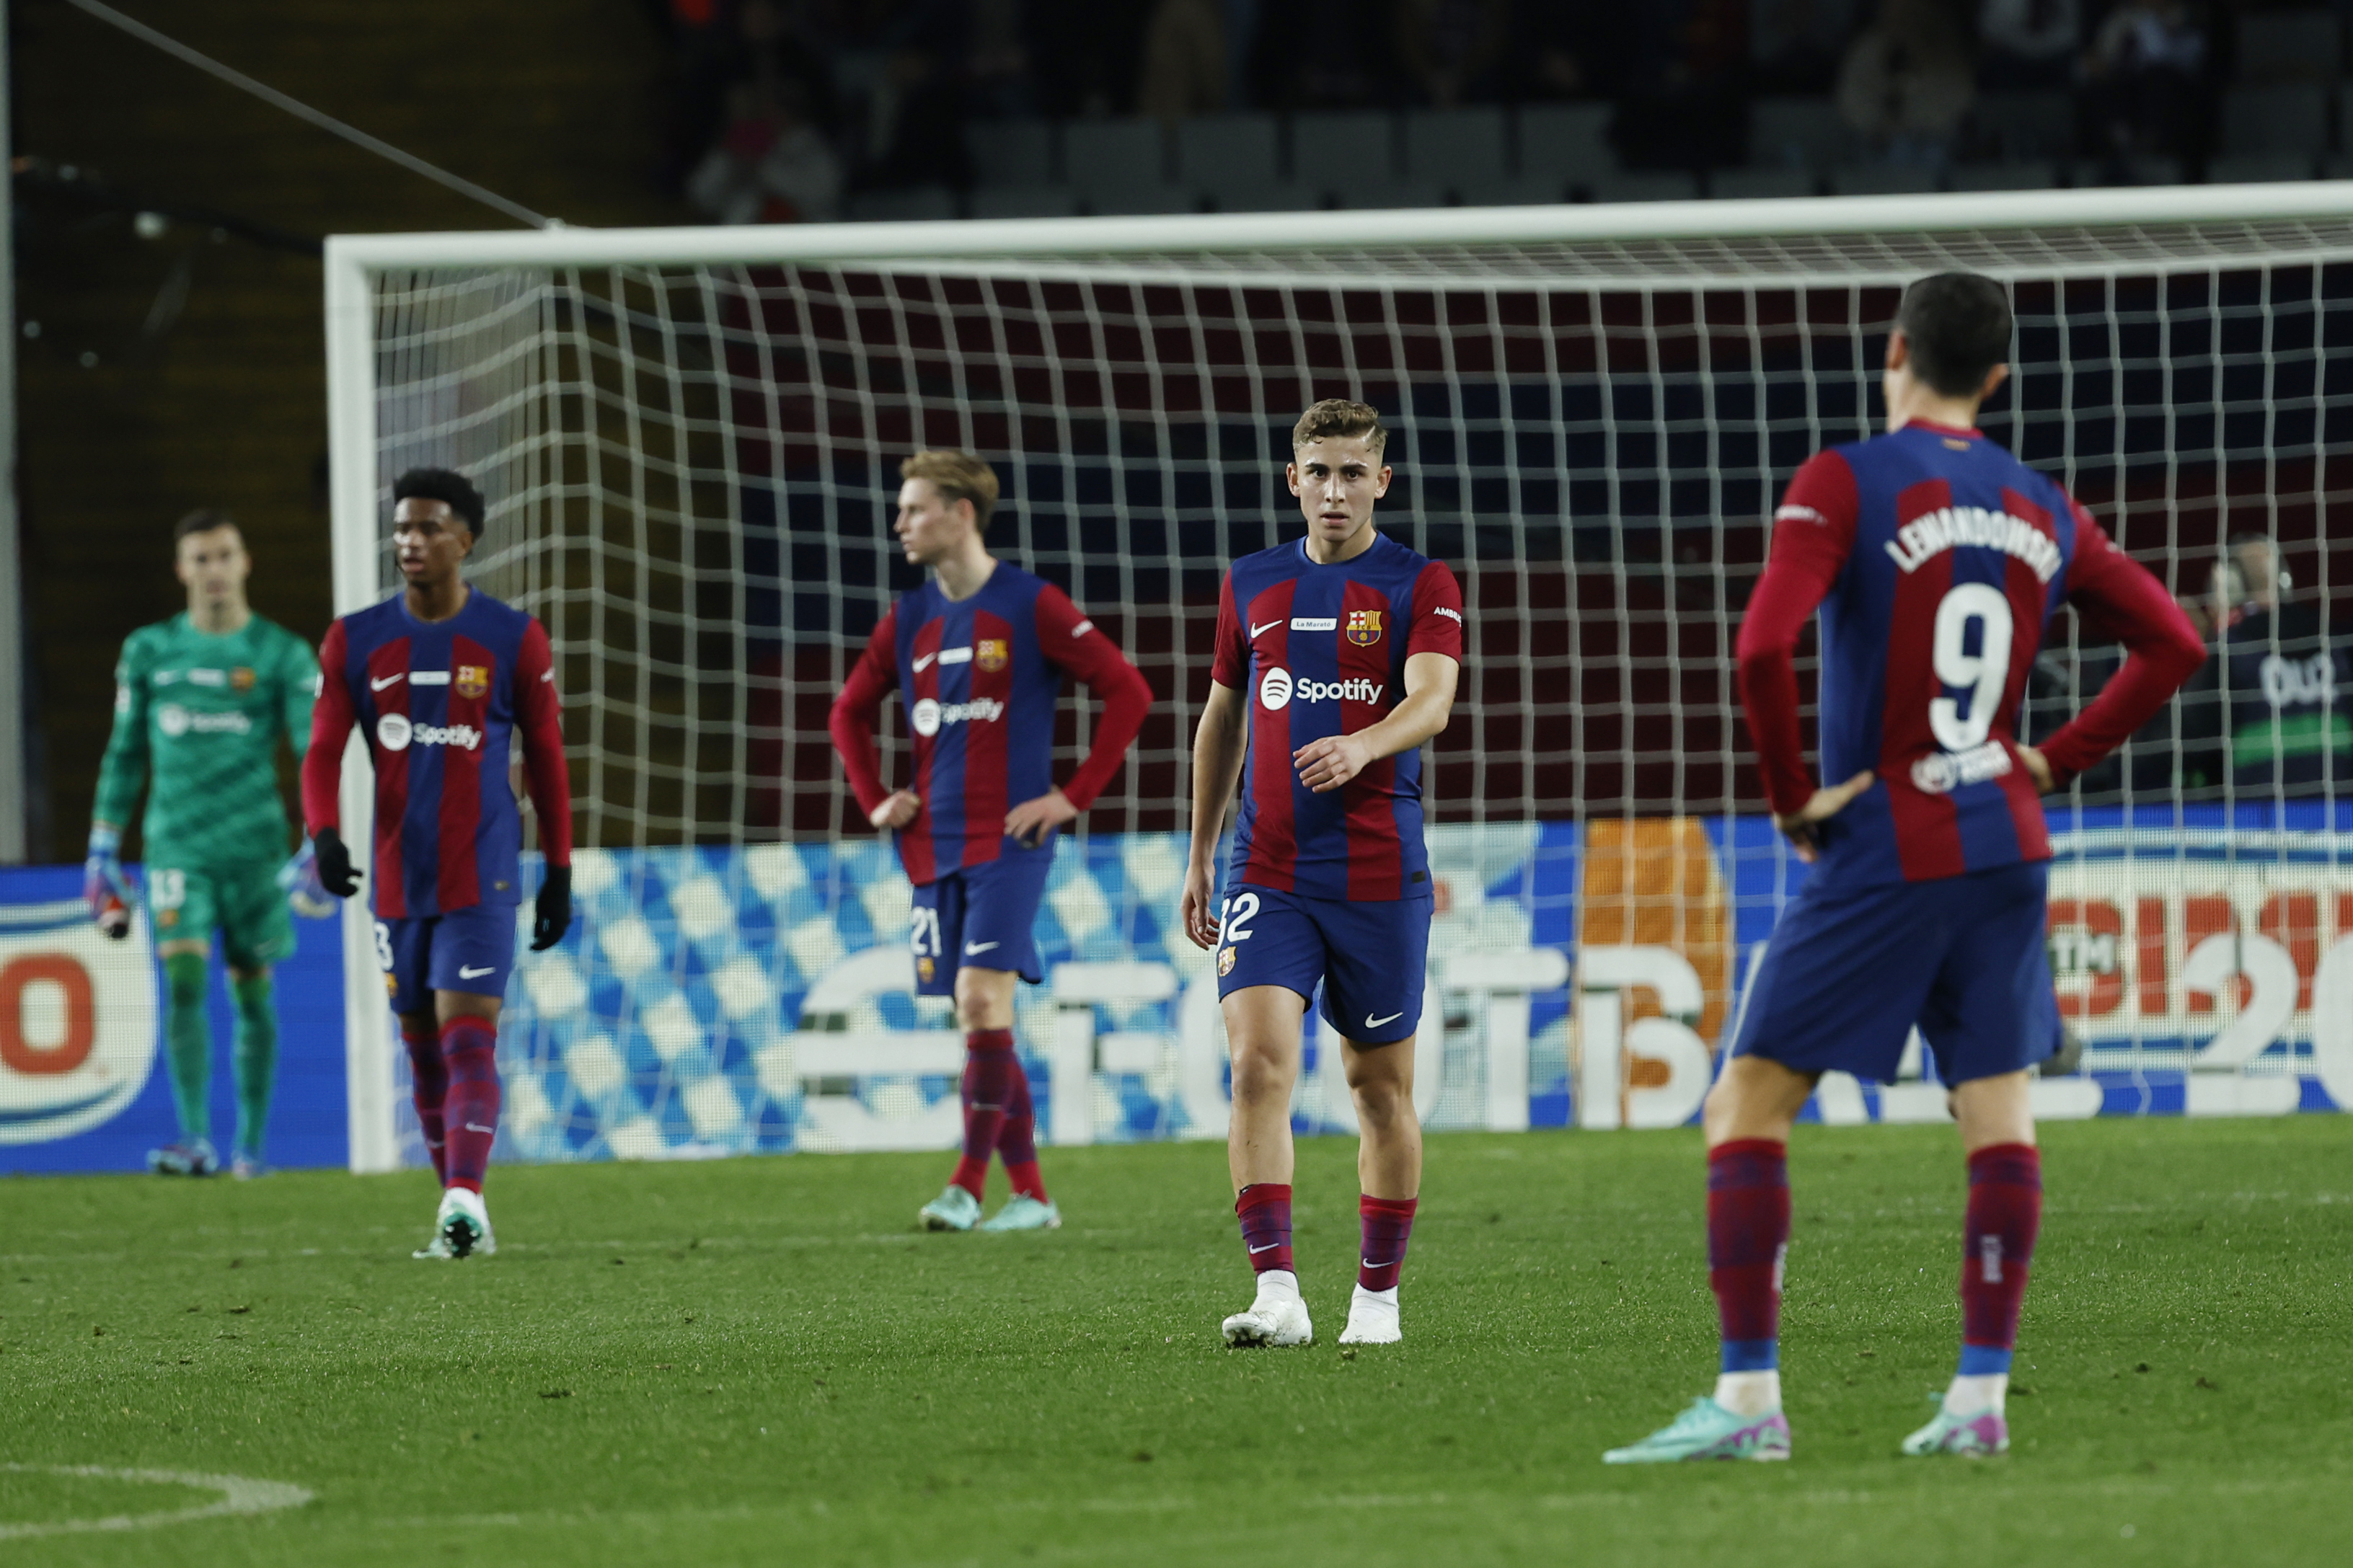 Barcelona’s team players react after defeat by Girona